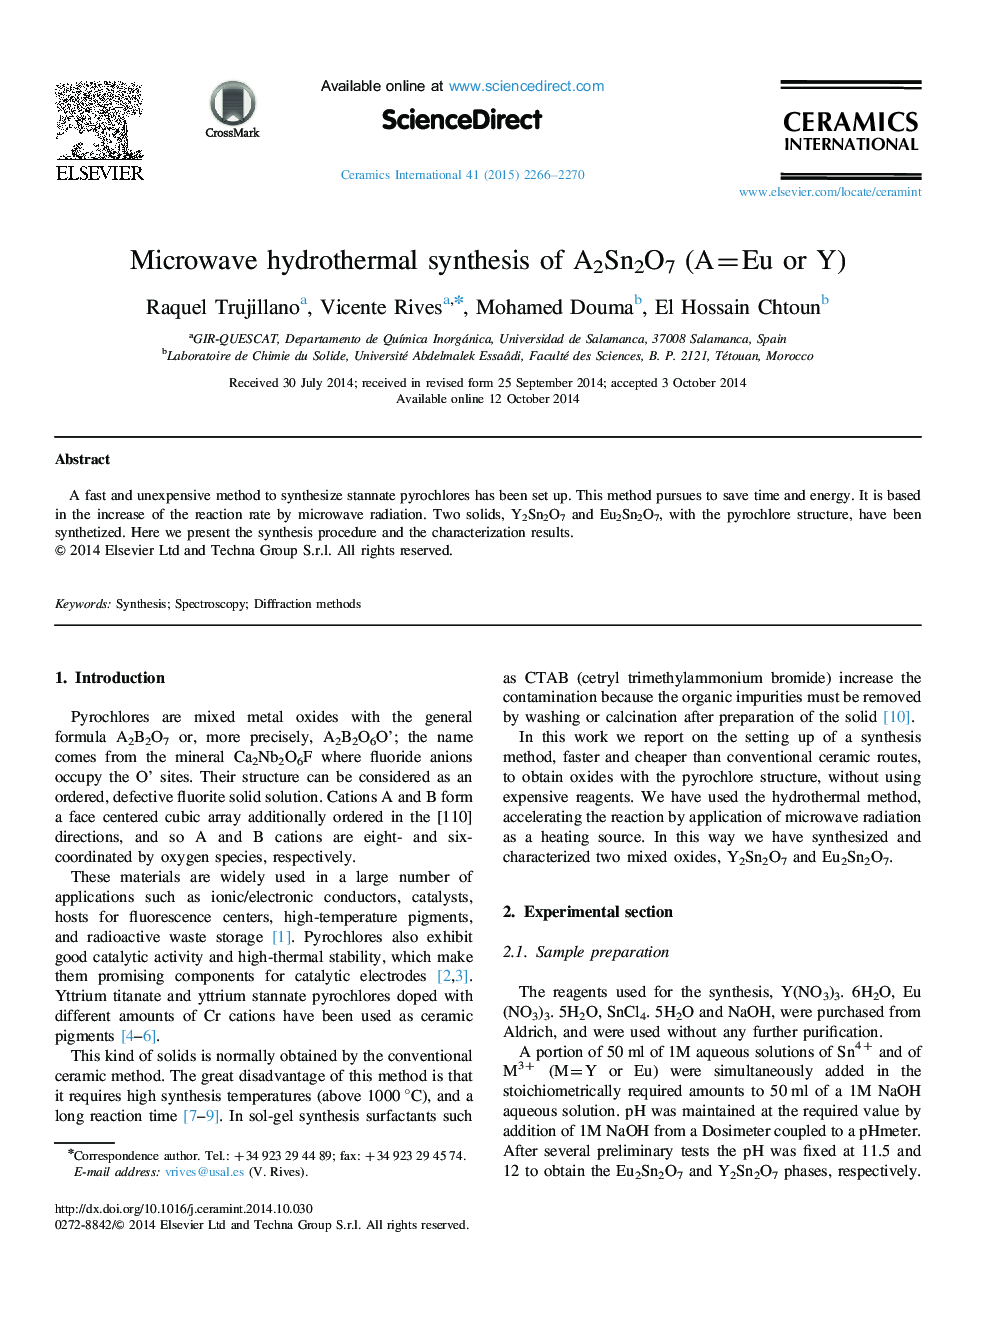 Microwave hydrothermal synthesis of A2Sn2O7 (A=Eu or Y)